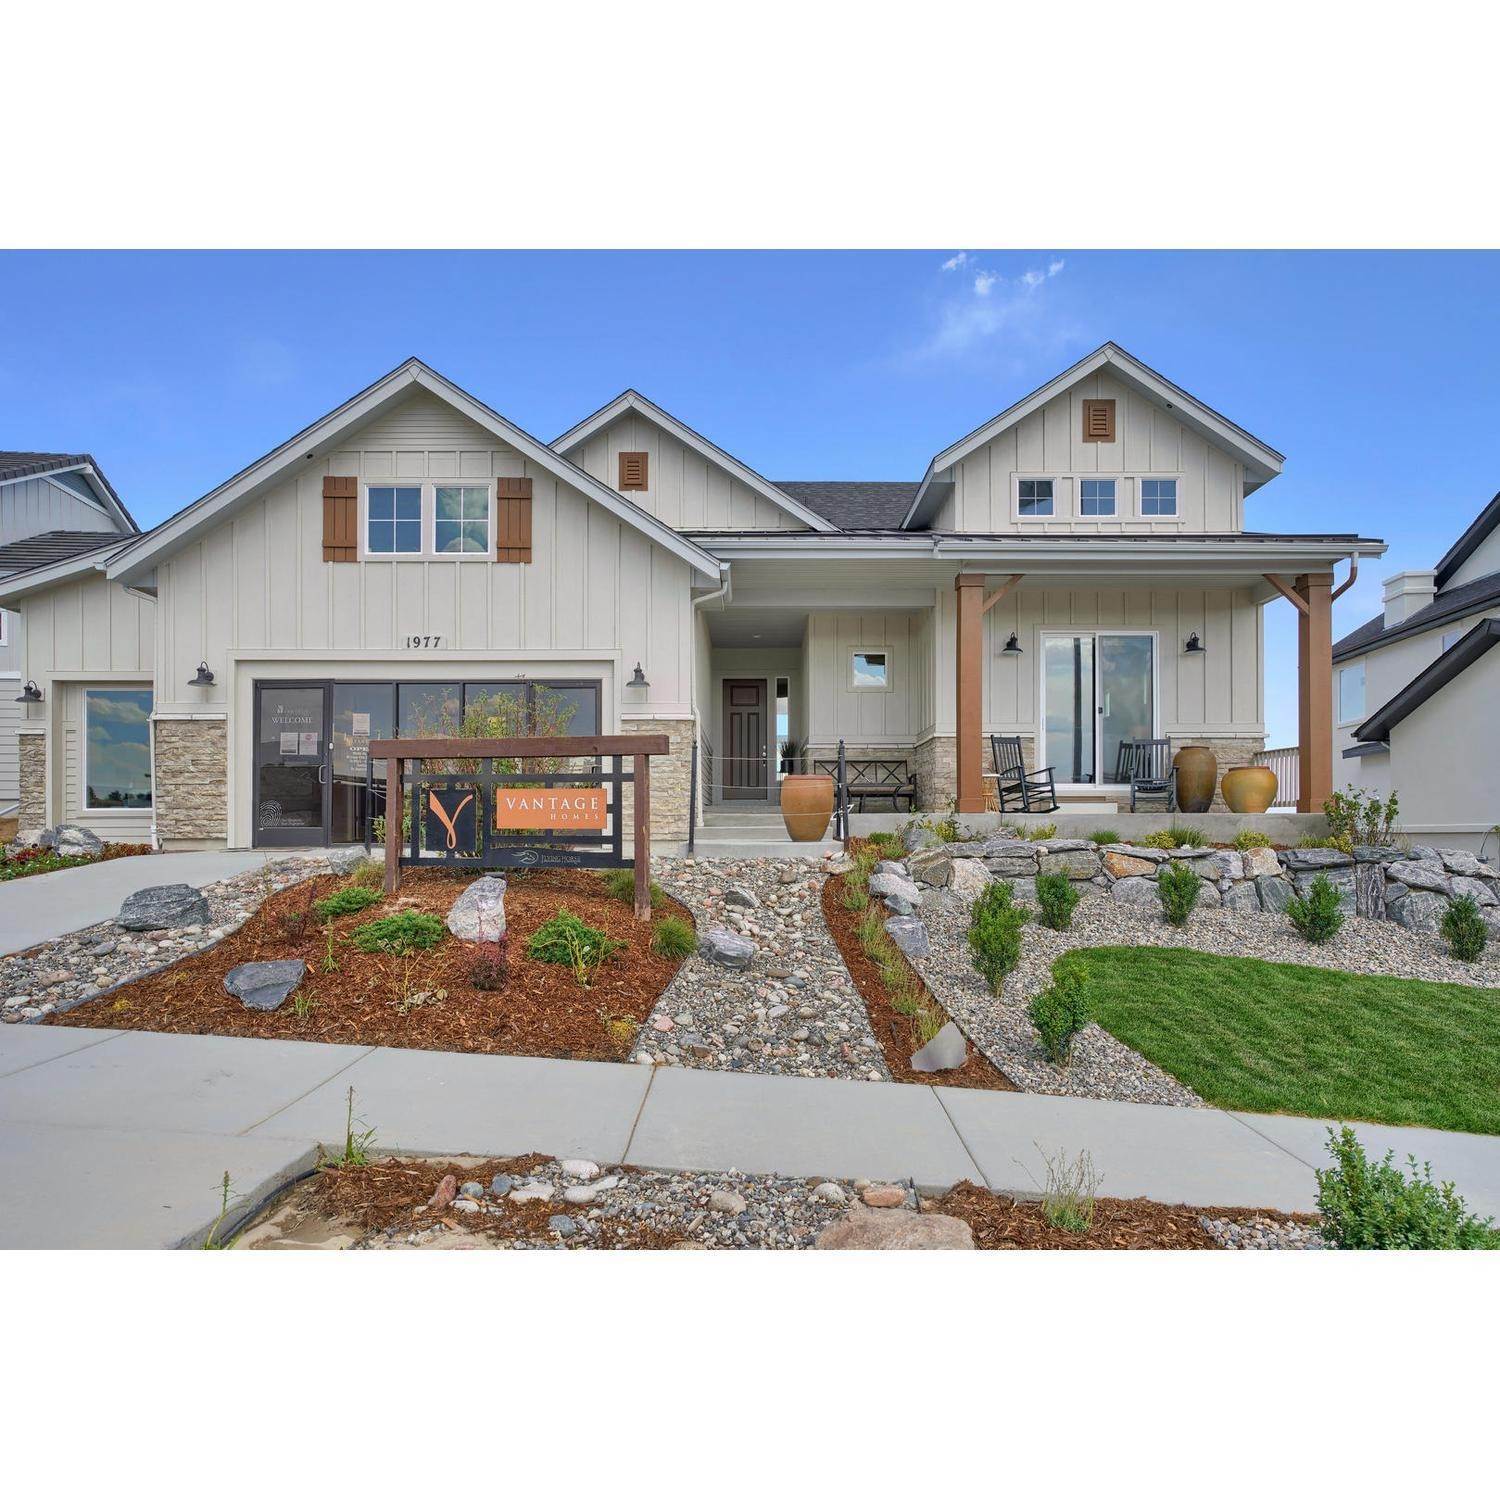 9. Flying Horse building at 16426 Monument Creek Court, Monument, CO 80132